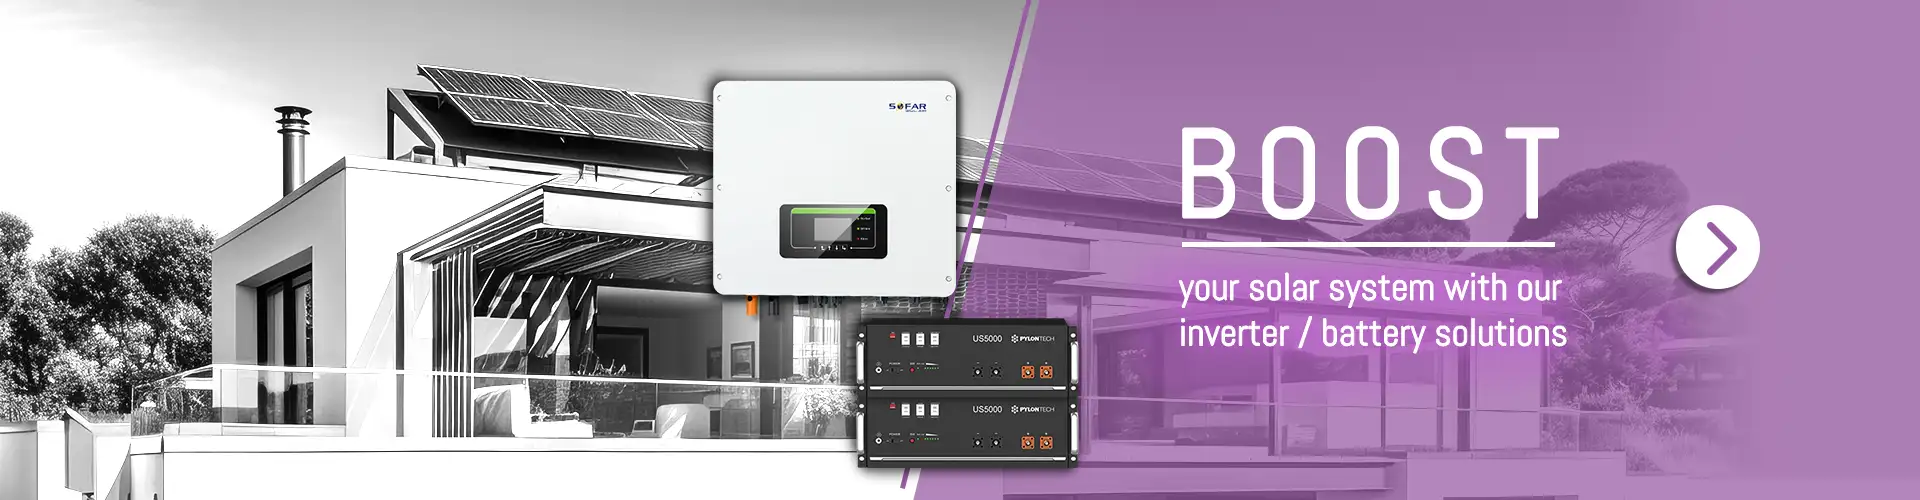 Sofar hybrid inverter Pylontech batteries with inscription Boost your solar system with our batteries and inverters